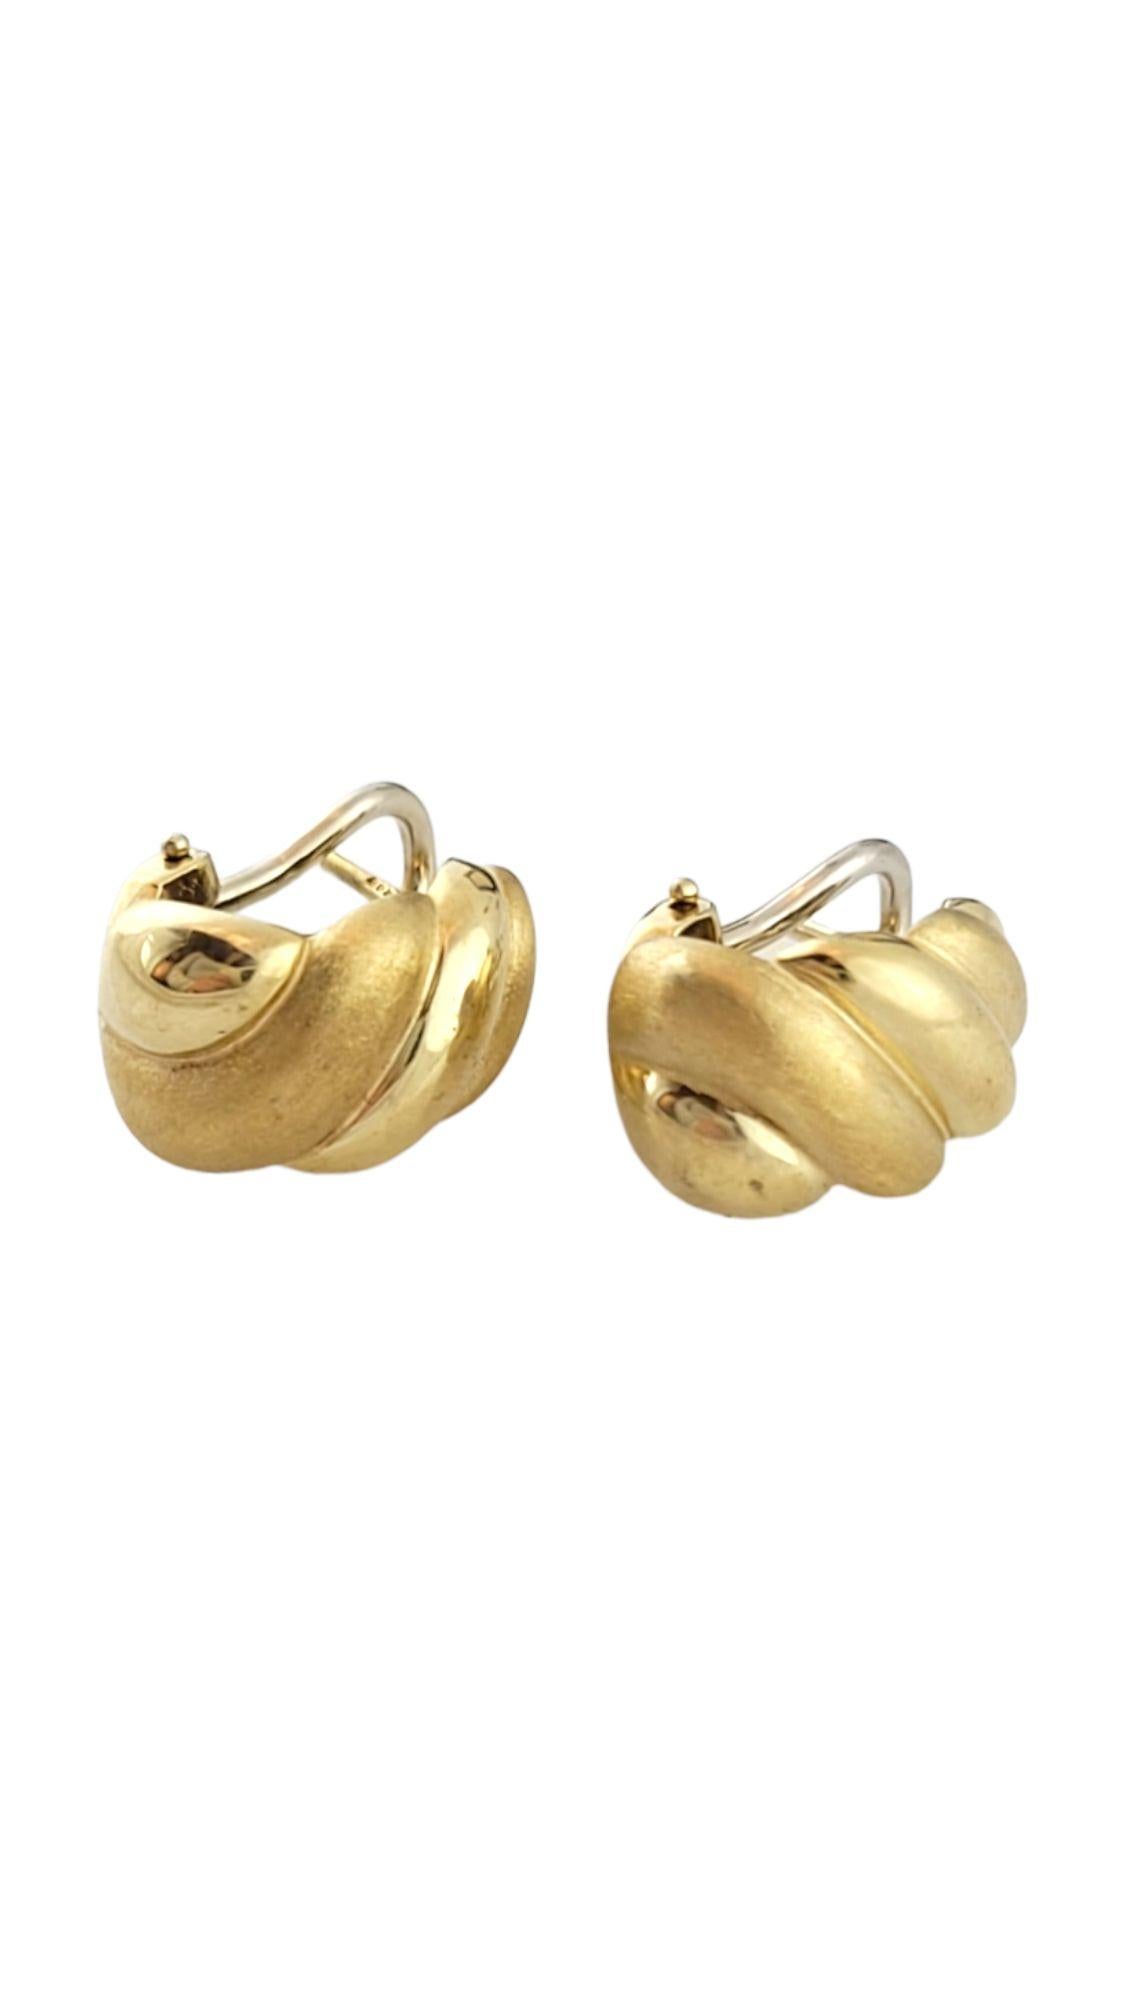 Beautiful set of 14K gold cuff earrings with a gorgeous twist design!

Size: 15.1mm X 9.8mm X 13.4mm

Weight: 5.99 g/ 3.9 dwt

Hallmark: 585

Very good condition, professionally polished.

Will come packaged in a gift box or pouch (when possible)